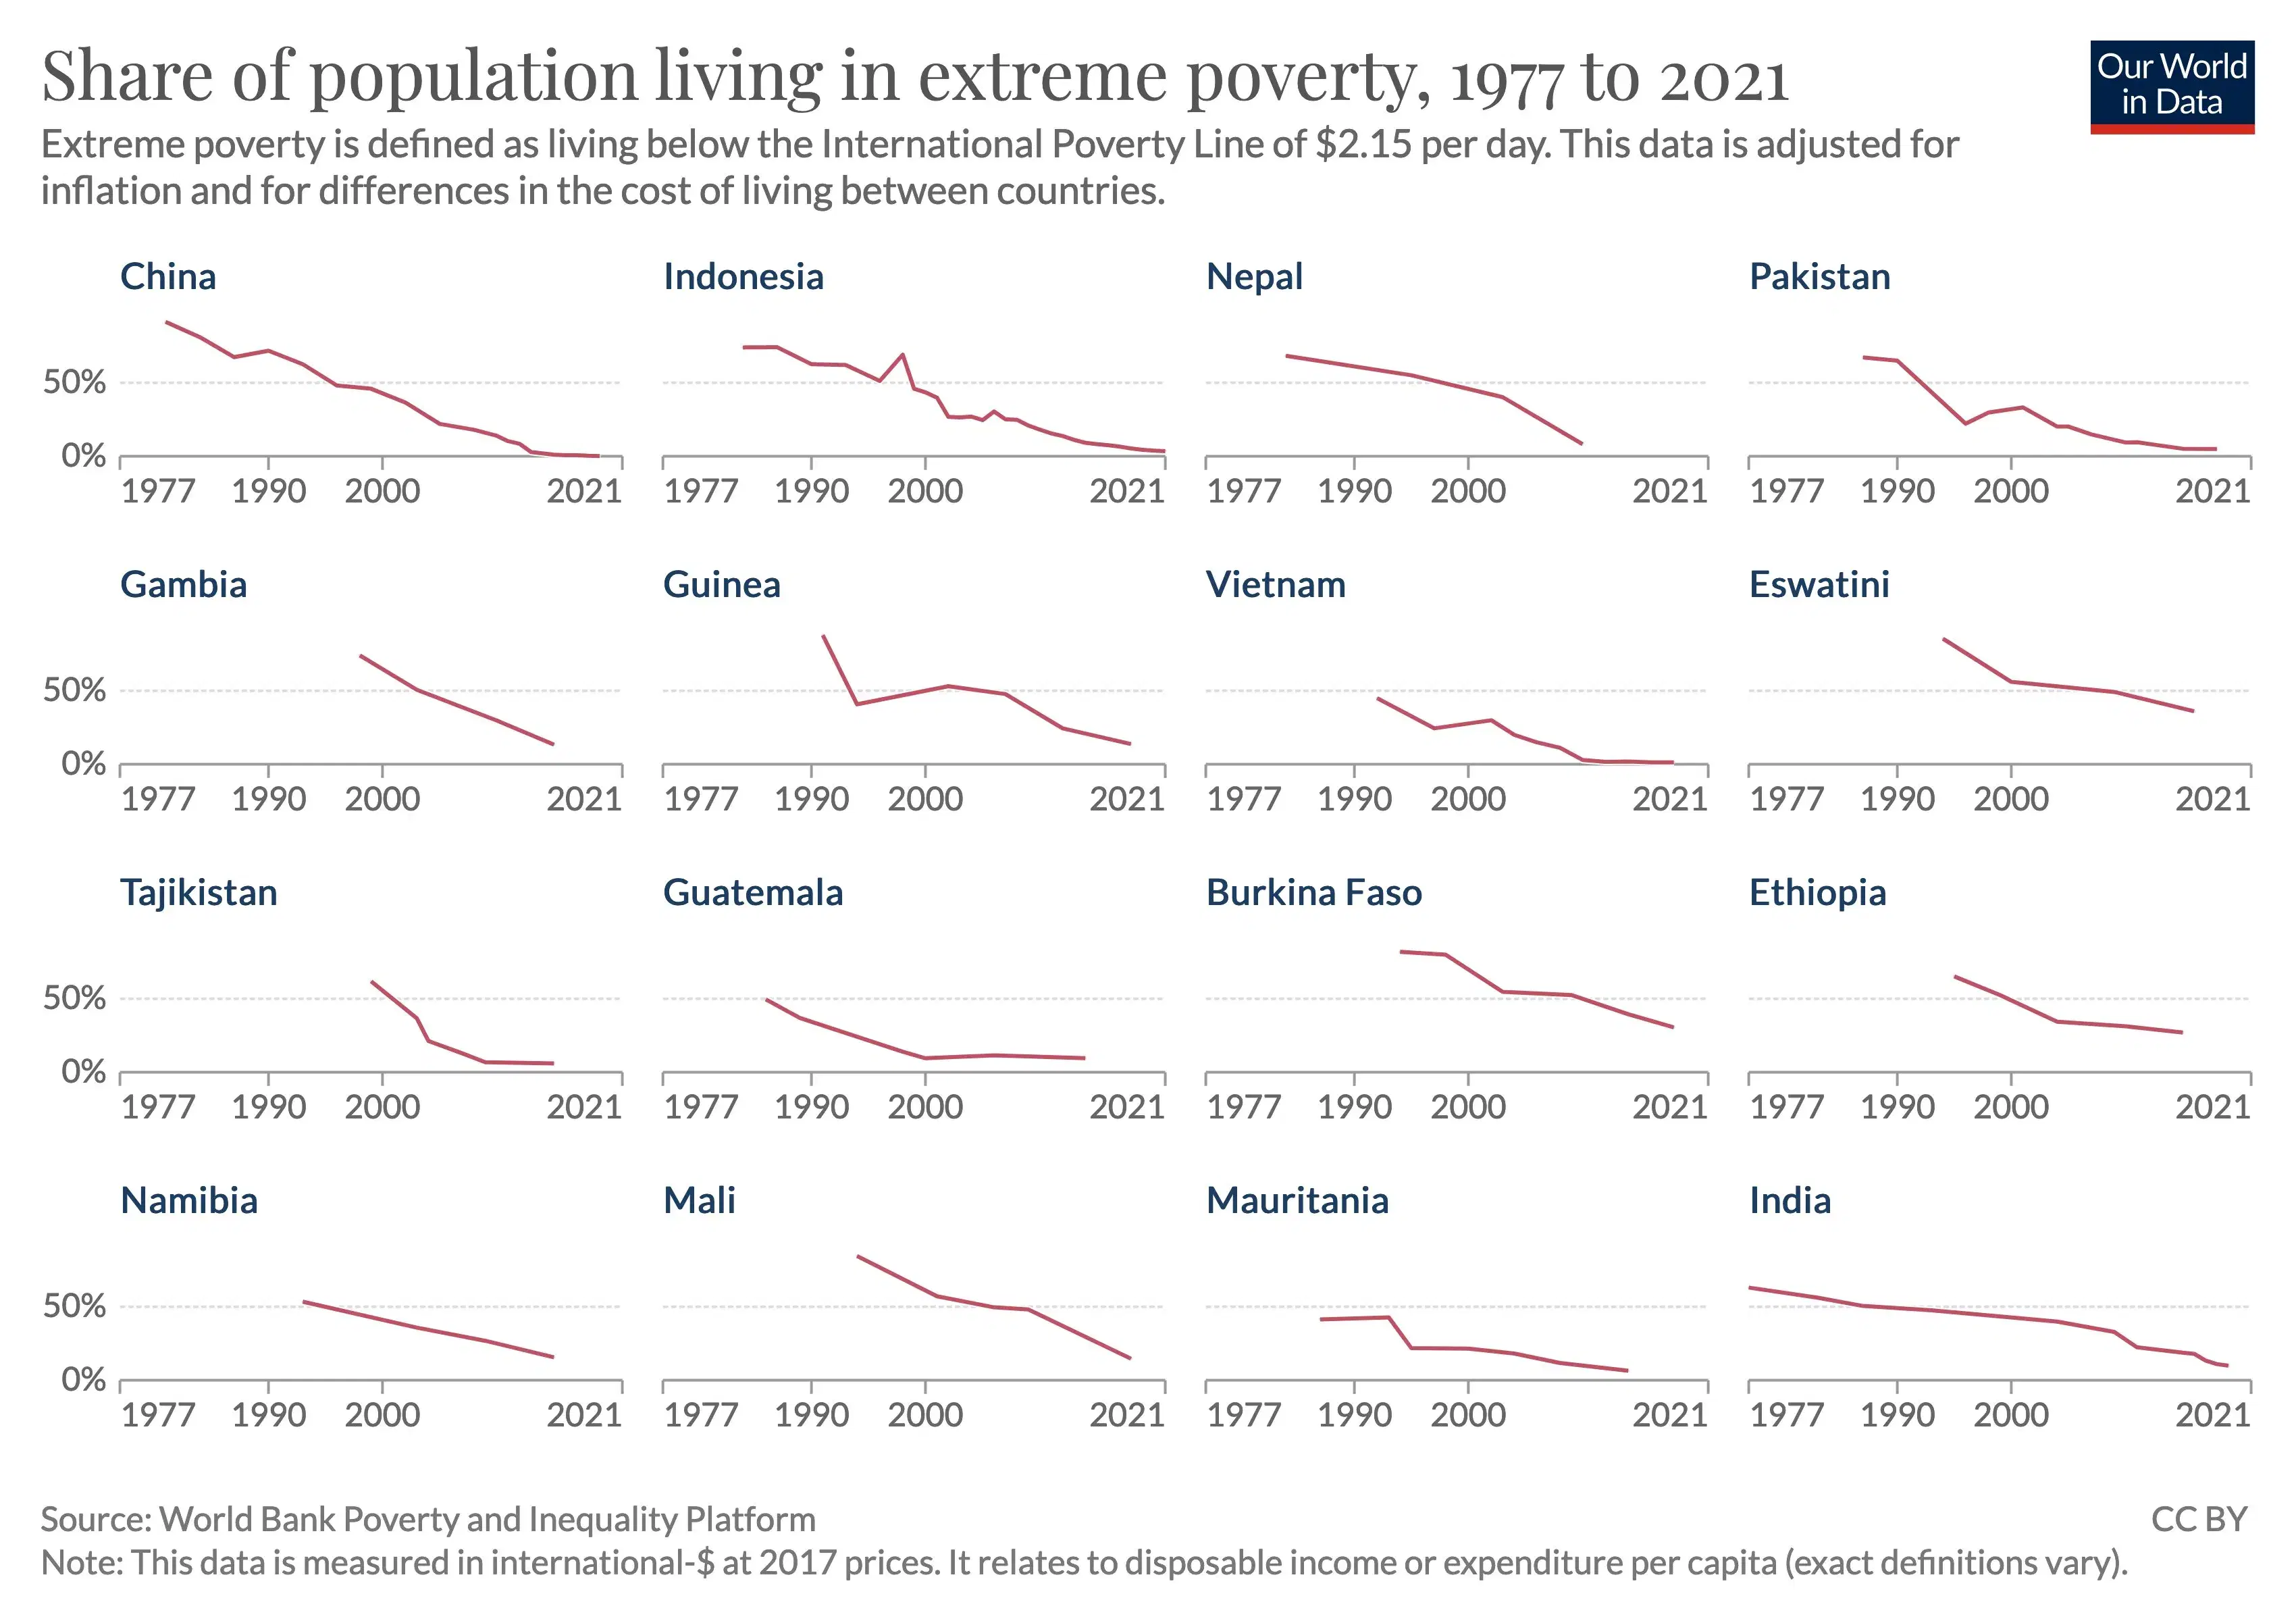 Share of the Population Living in Extreme Poverty, Selected Countries